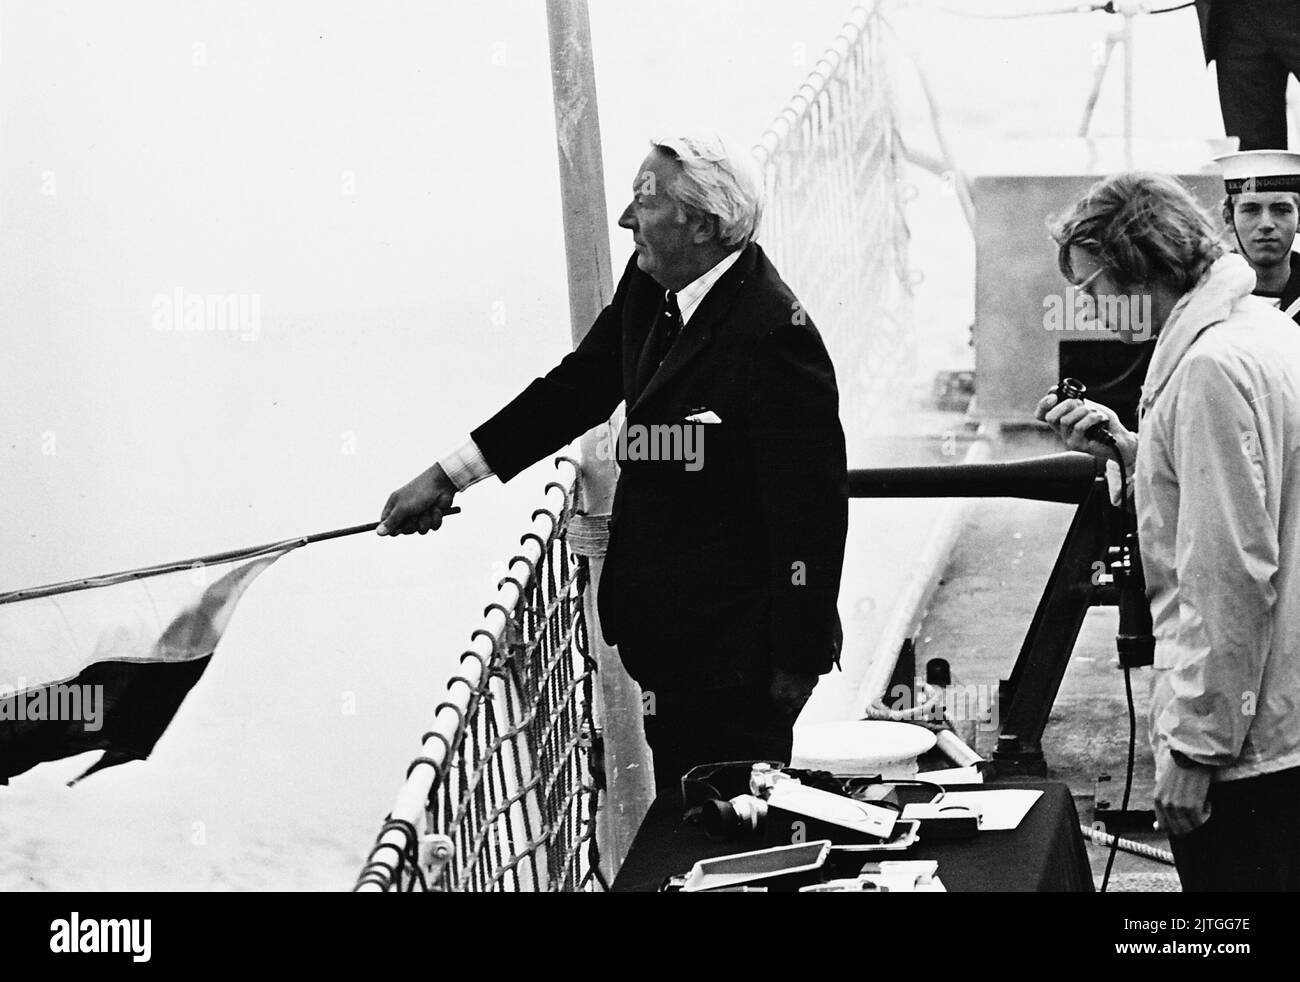 AJAXNETPHOTO. 31ST AUGUST, 1975. LONDON, ENGLAND. - FLAG WAVER - FT CLIPPER RACE -  MR EDWARD HEATH WAVES START FLAG FROM DECK OF THE FRIGATE HMS LONDONDERRY OFF SHEERNESS AS FOUR OCEAN RACING YACHTS SET OUT TO BEAT CLIPPER SHIP PATRIARCH RECORD OF 69 DAYS FROM LONDON TO SYDNEY, AUSTRALIA, SET IN 1869/70. YACHTS WILL RACE BACK TO LONDON FROM SYDNEY IN ABOUT THREE MONTHS TIME.  PHOTO:JONATHAN EASTLAND/AJAX REF:750209 GR2 340 220105 21 Stock Photo